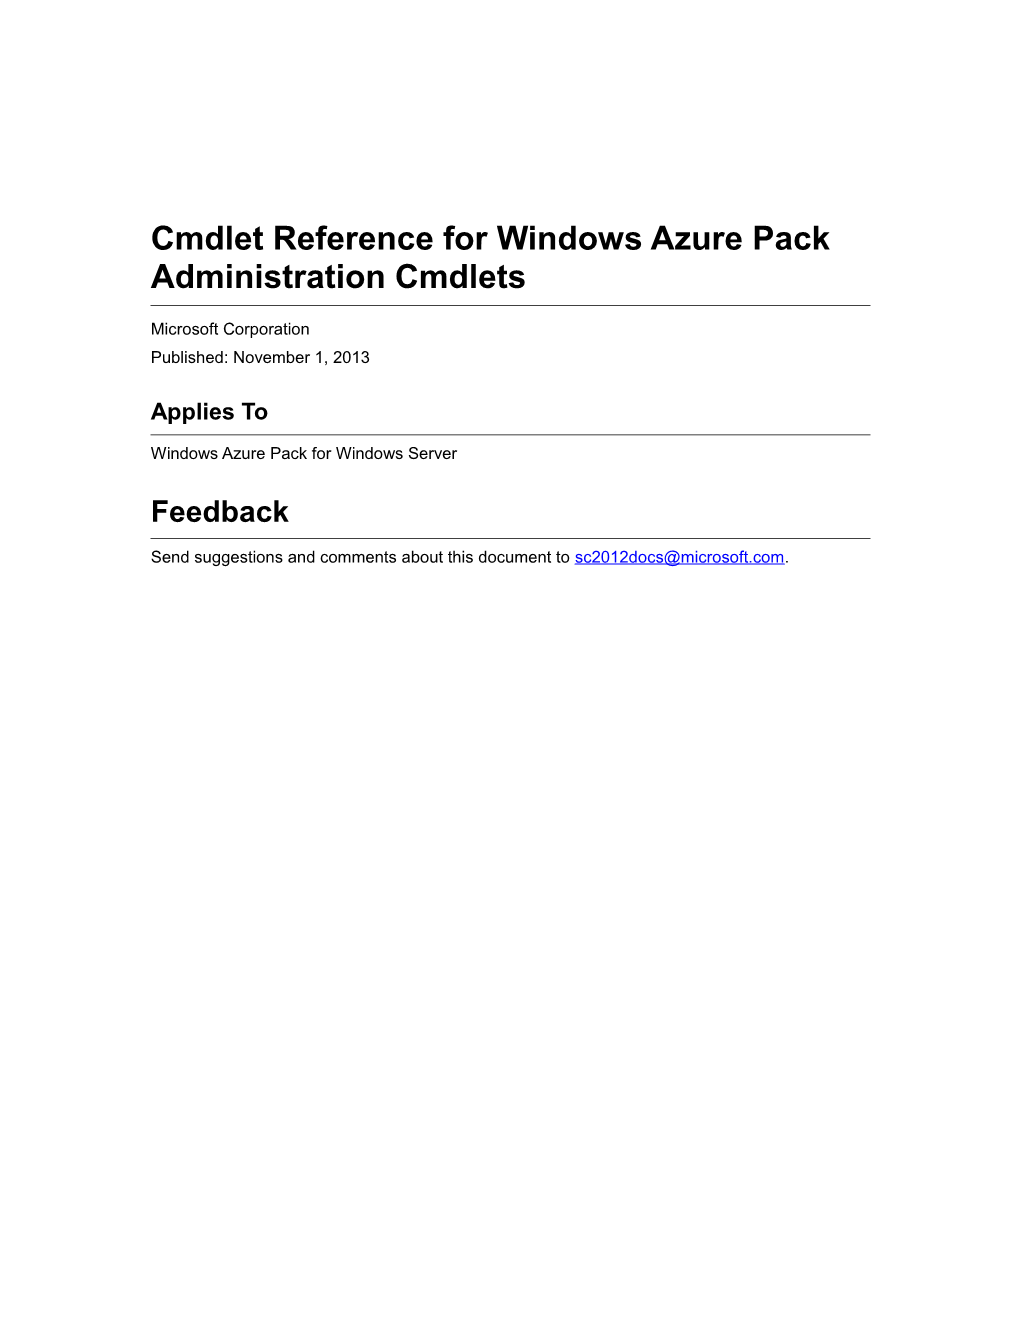 Cmdlet Reference for Windows Azure Pack Administration Cmdlets